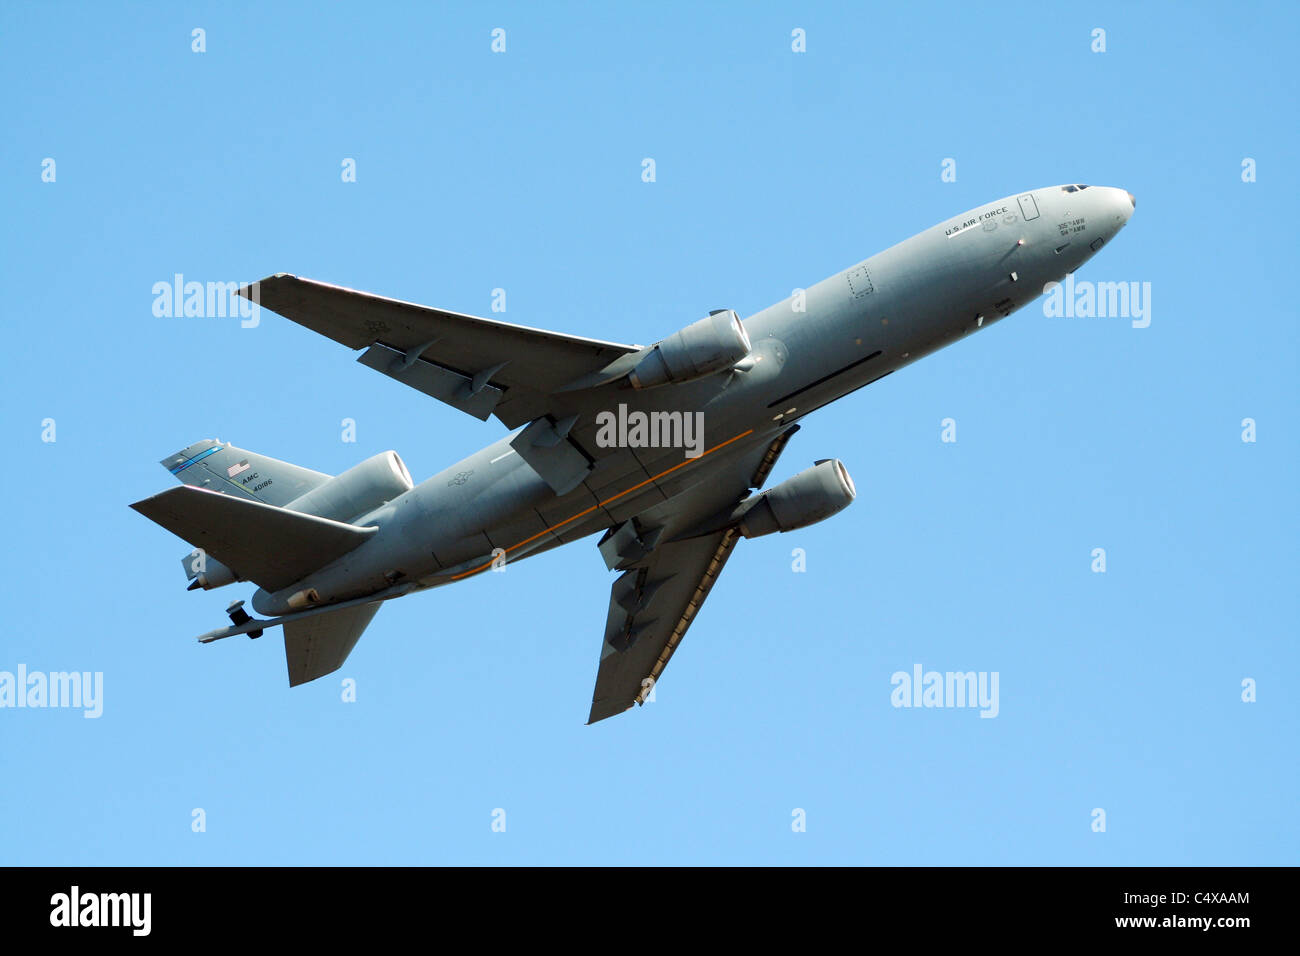 US Air Force KC-10 Extender tanker take off Stock Photo